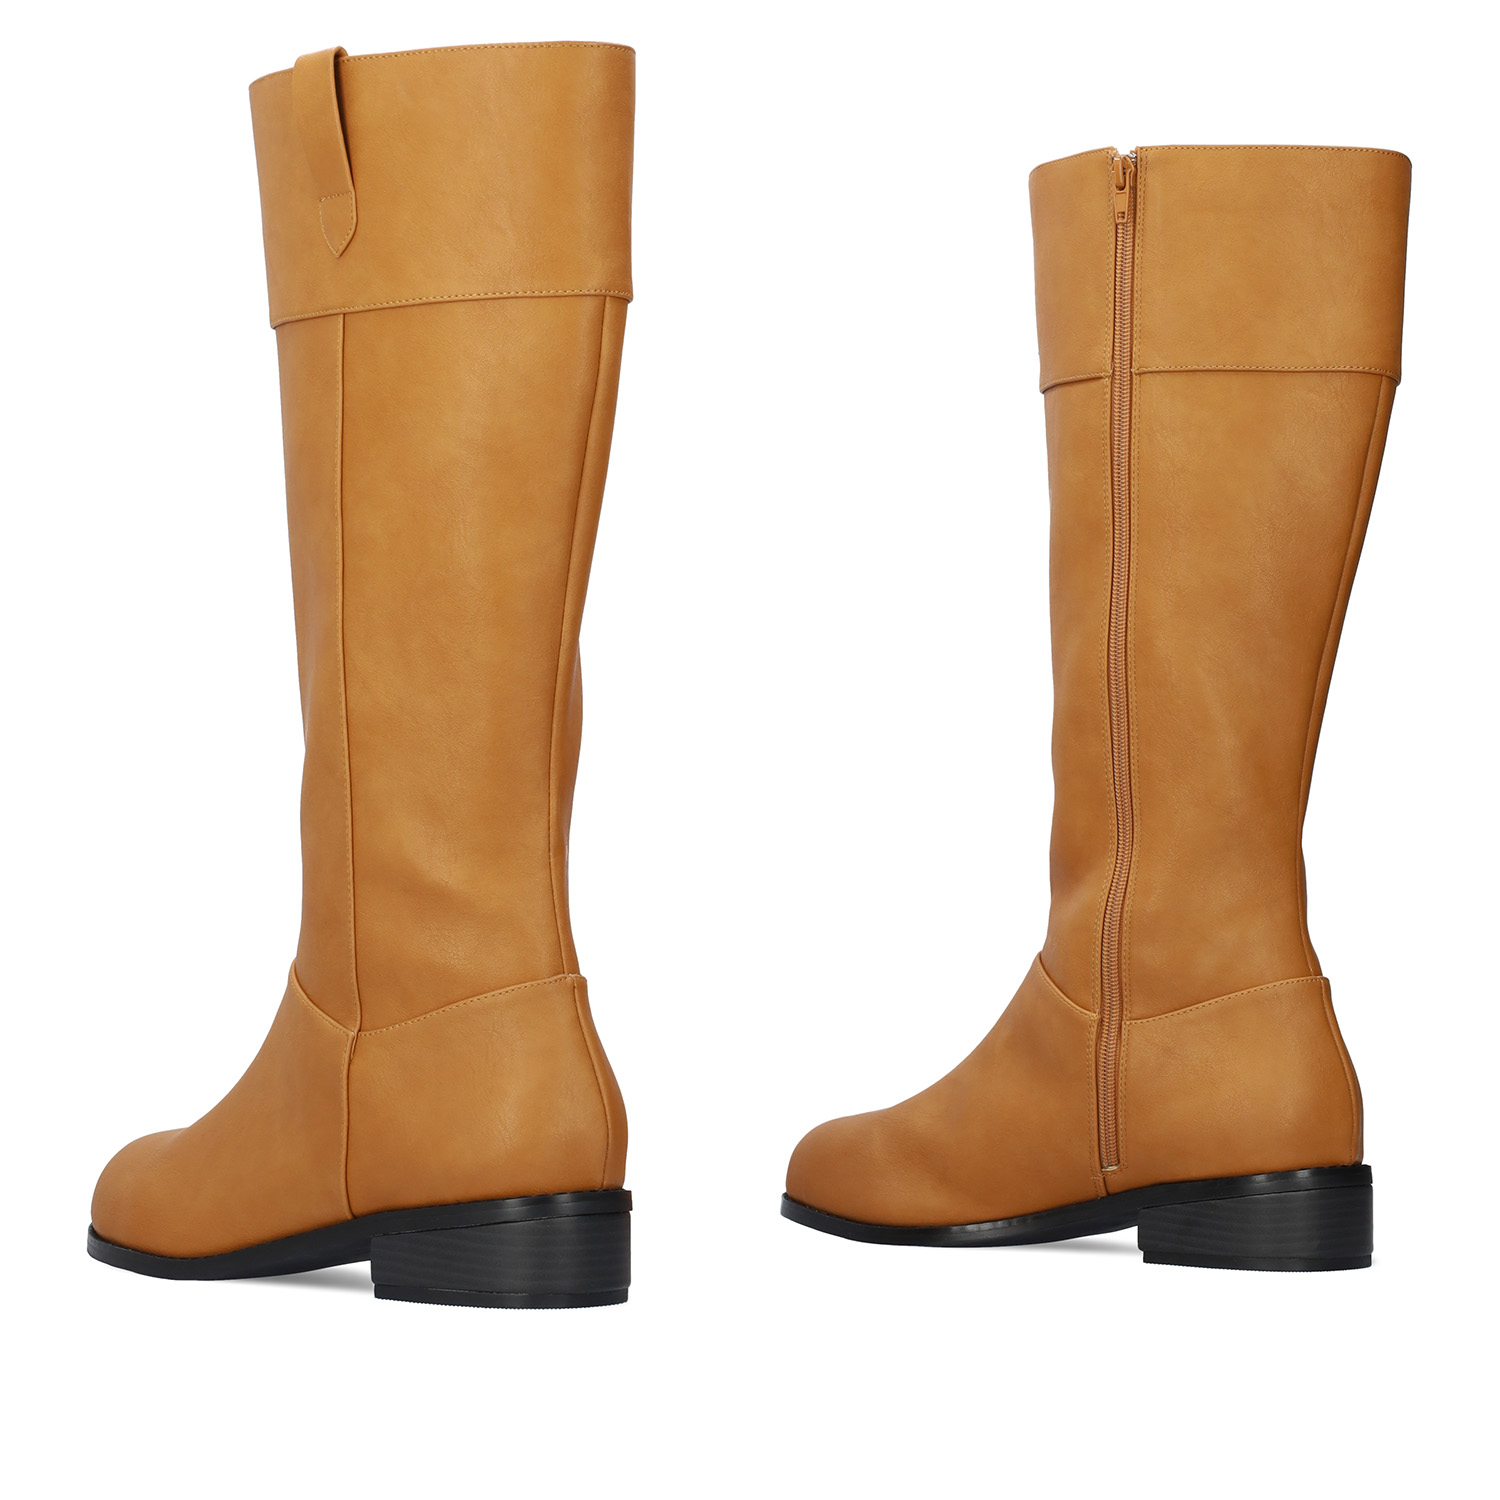 Flat high-calf boots in camel faux leather. 